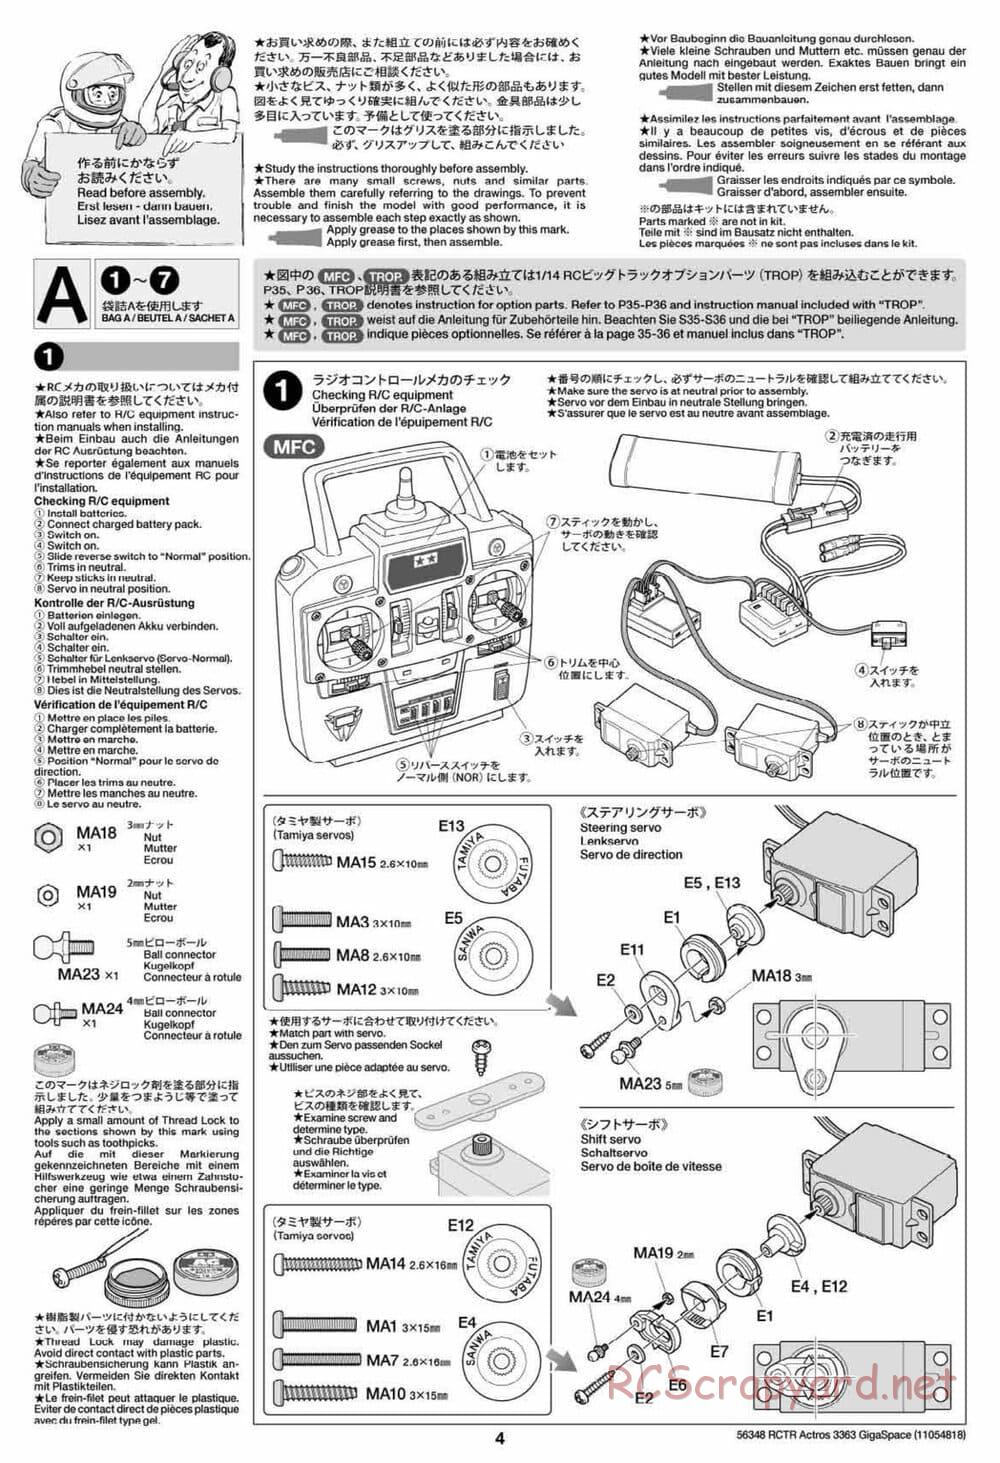 Tamiya - Mercedes-Benz Actros 3363 6x4 GigaSpace Tractor Truck Chassis - Manual - Page 4